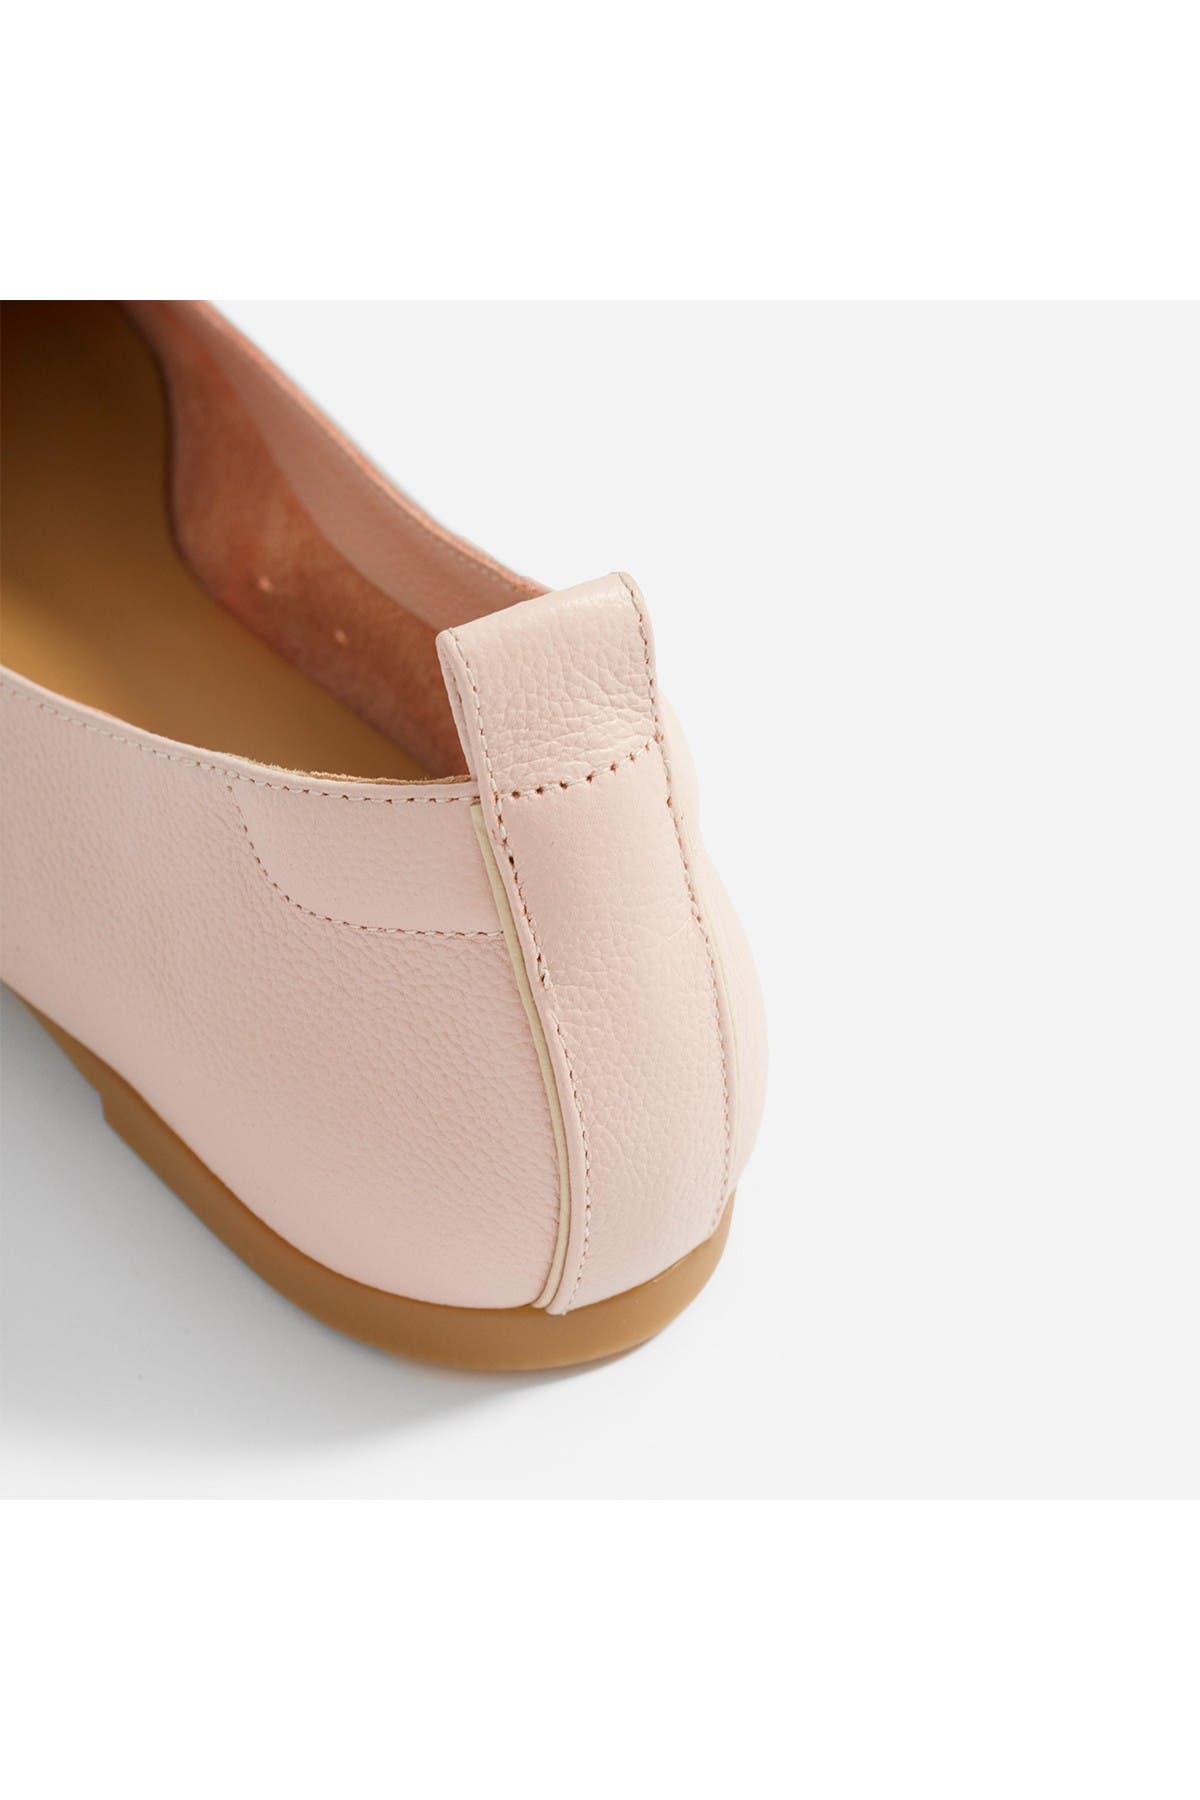 EVERLANE The Day Glove Leather Ballet Flat Nordstrom Rack